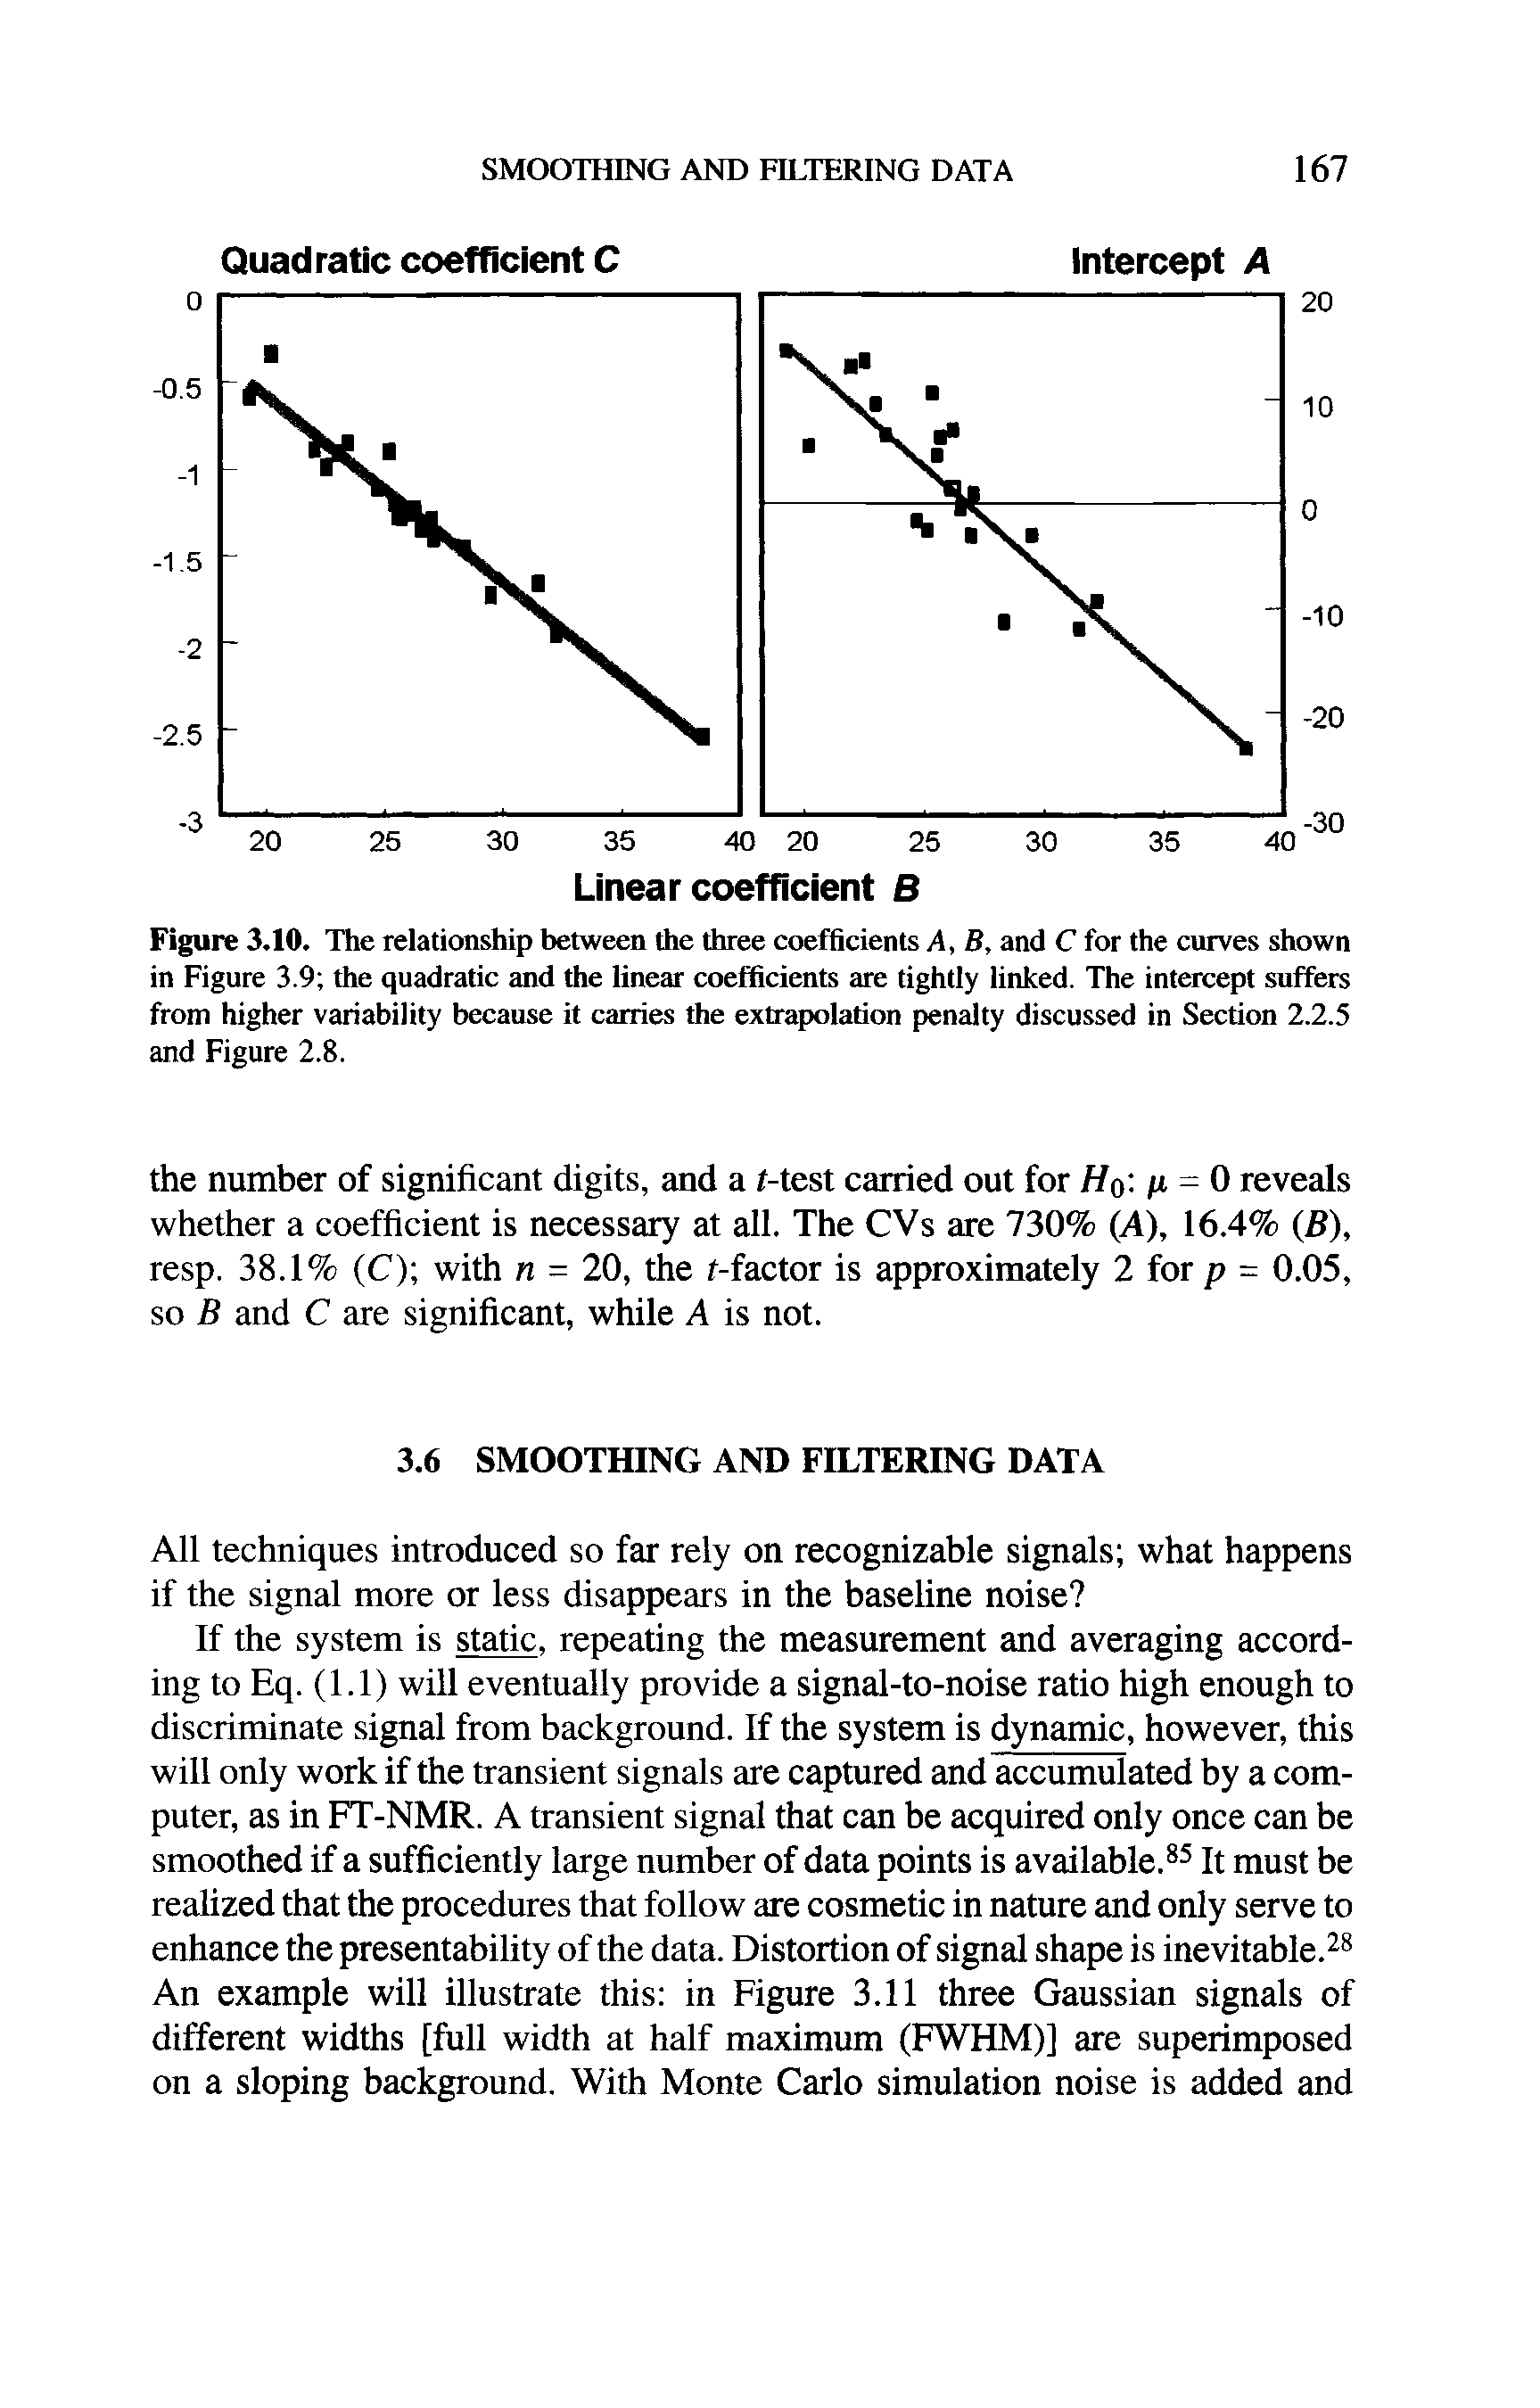 Figure 3.10. The relationship between the three coefficients A, B, and C for the curves shown in Figure 3.9 the quadratic and the linear coefficients are tightly linked. The intercept suffers from higher variability because it carries the extrapolation penalty discussed in Section 2.2.5 and Figure 2.8.